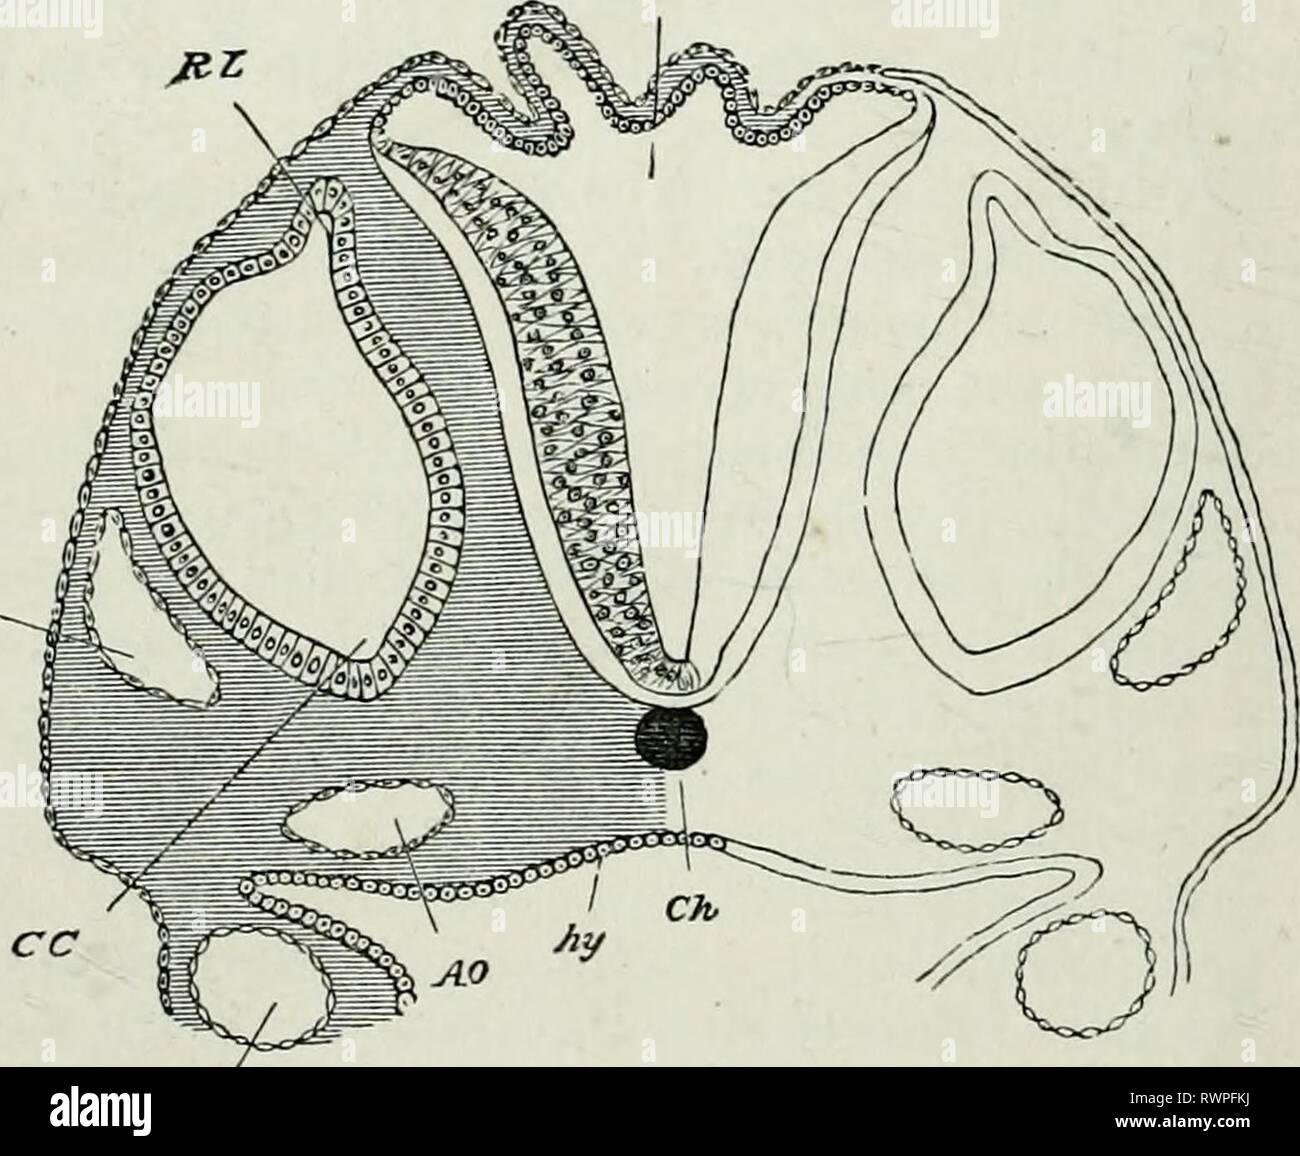 The elements of Embryology, (1874) The elements of Embryology, elementsofembryo74fost Year: 1874  110 THE THIRD DAY. [chap. epiblast furnishes the body of the cornea, the epiblast itself remaining as the anterior corneal epithelium. A portion of mesoblast, carried in from the front by the lens during its involution, gives rise to the capsule of the lens and suspensory ligament, while some mesoblast entering on the under side through the choroidal fissure becomes (in birds) tlie pecten, and probably also contributes to the vitreous humour. Of the walls of the optic cup, the thinner outer (poste Stock Photo